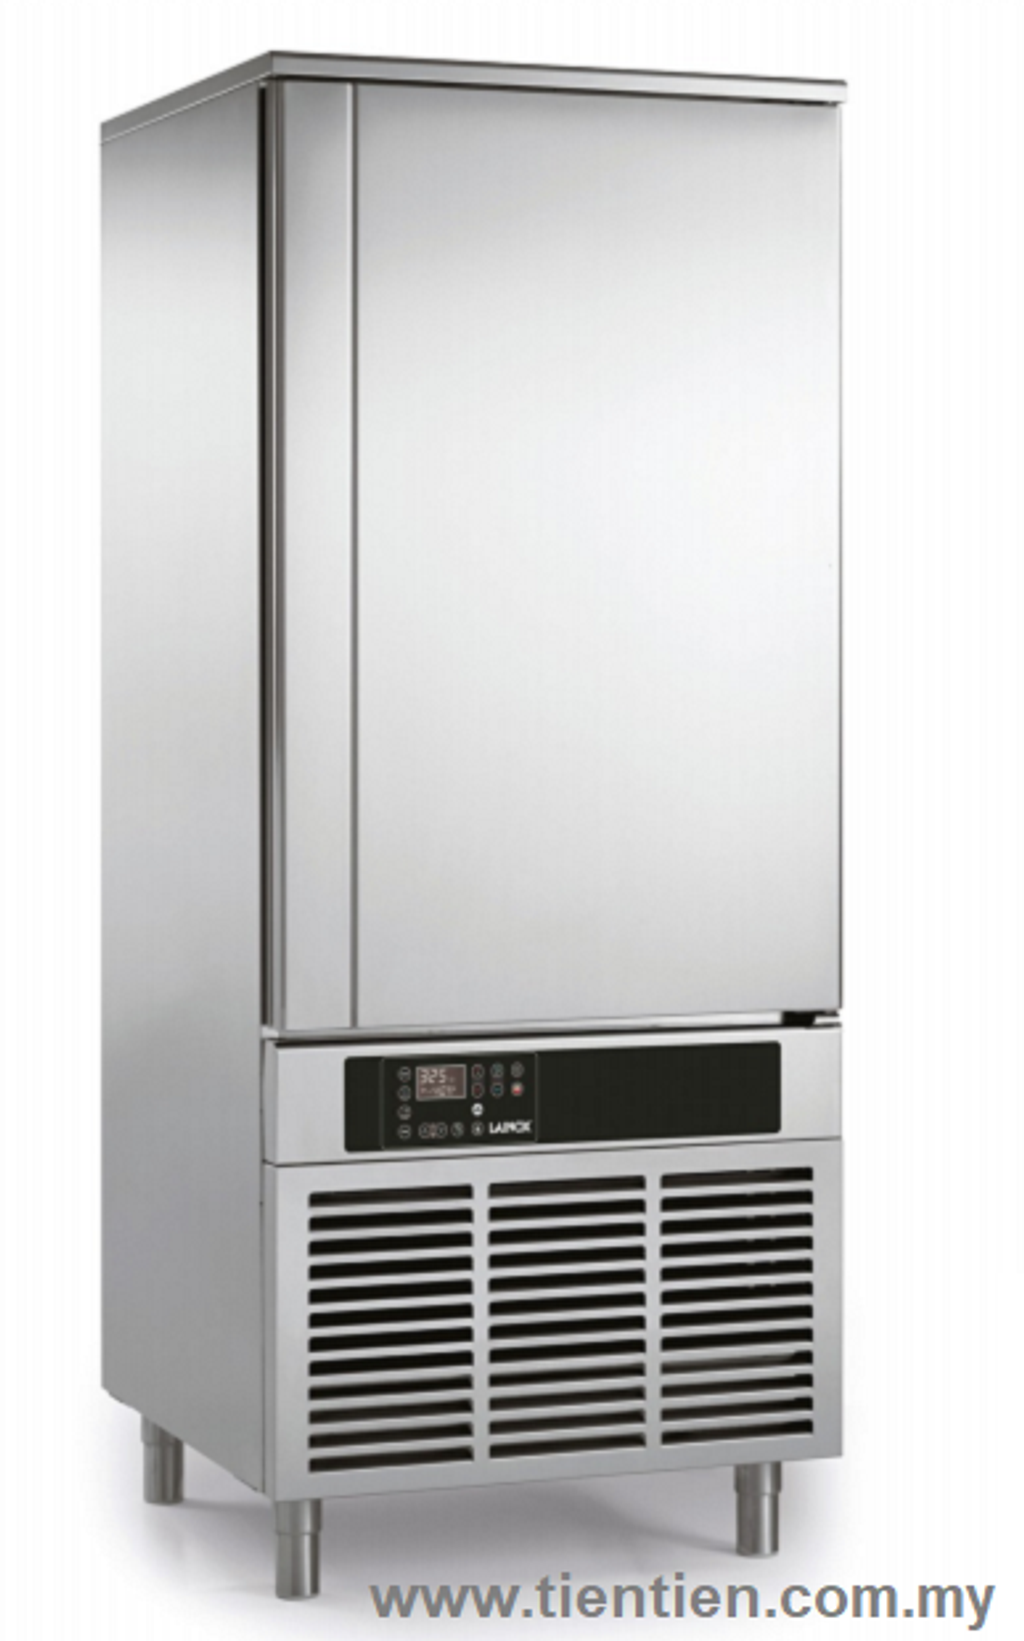 lainox-new-chill-series-blast-freezer-chiller-16-trays-pastry-bakery-pcm161s-tientien-malaysia.png